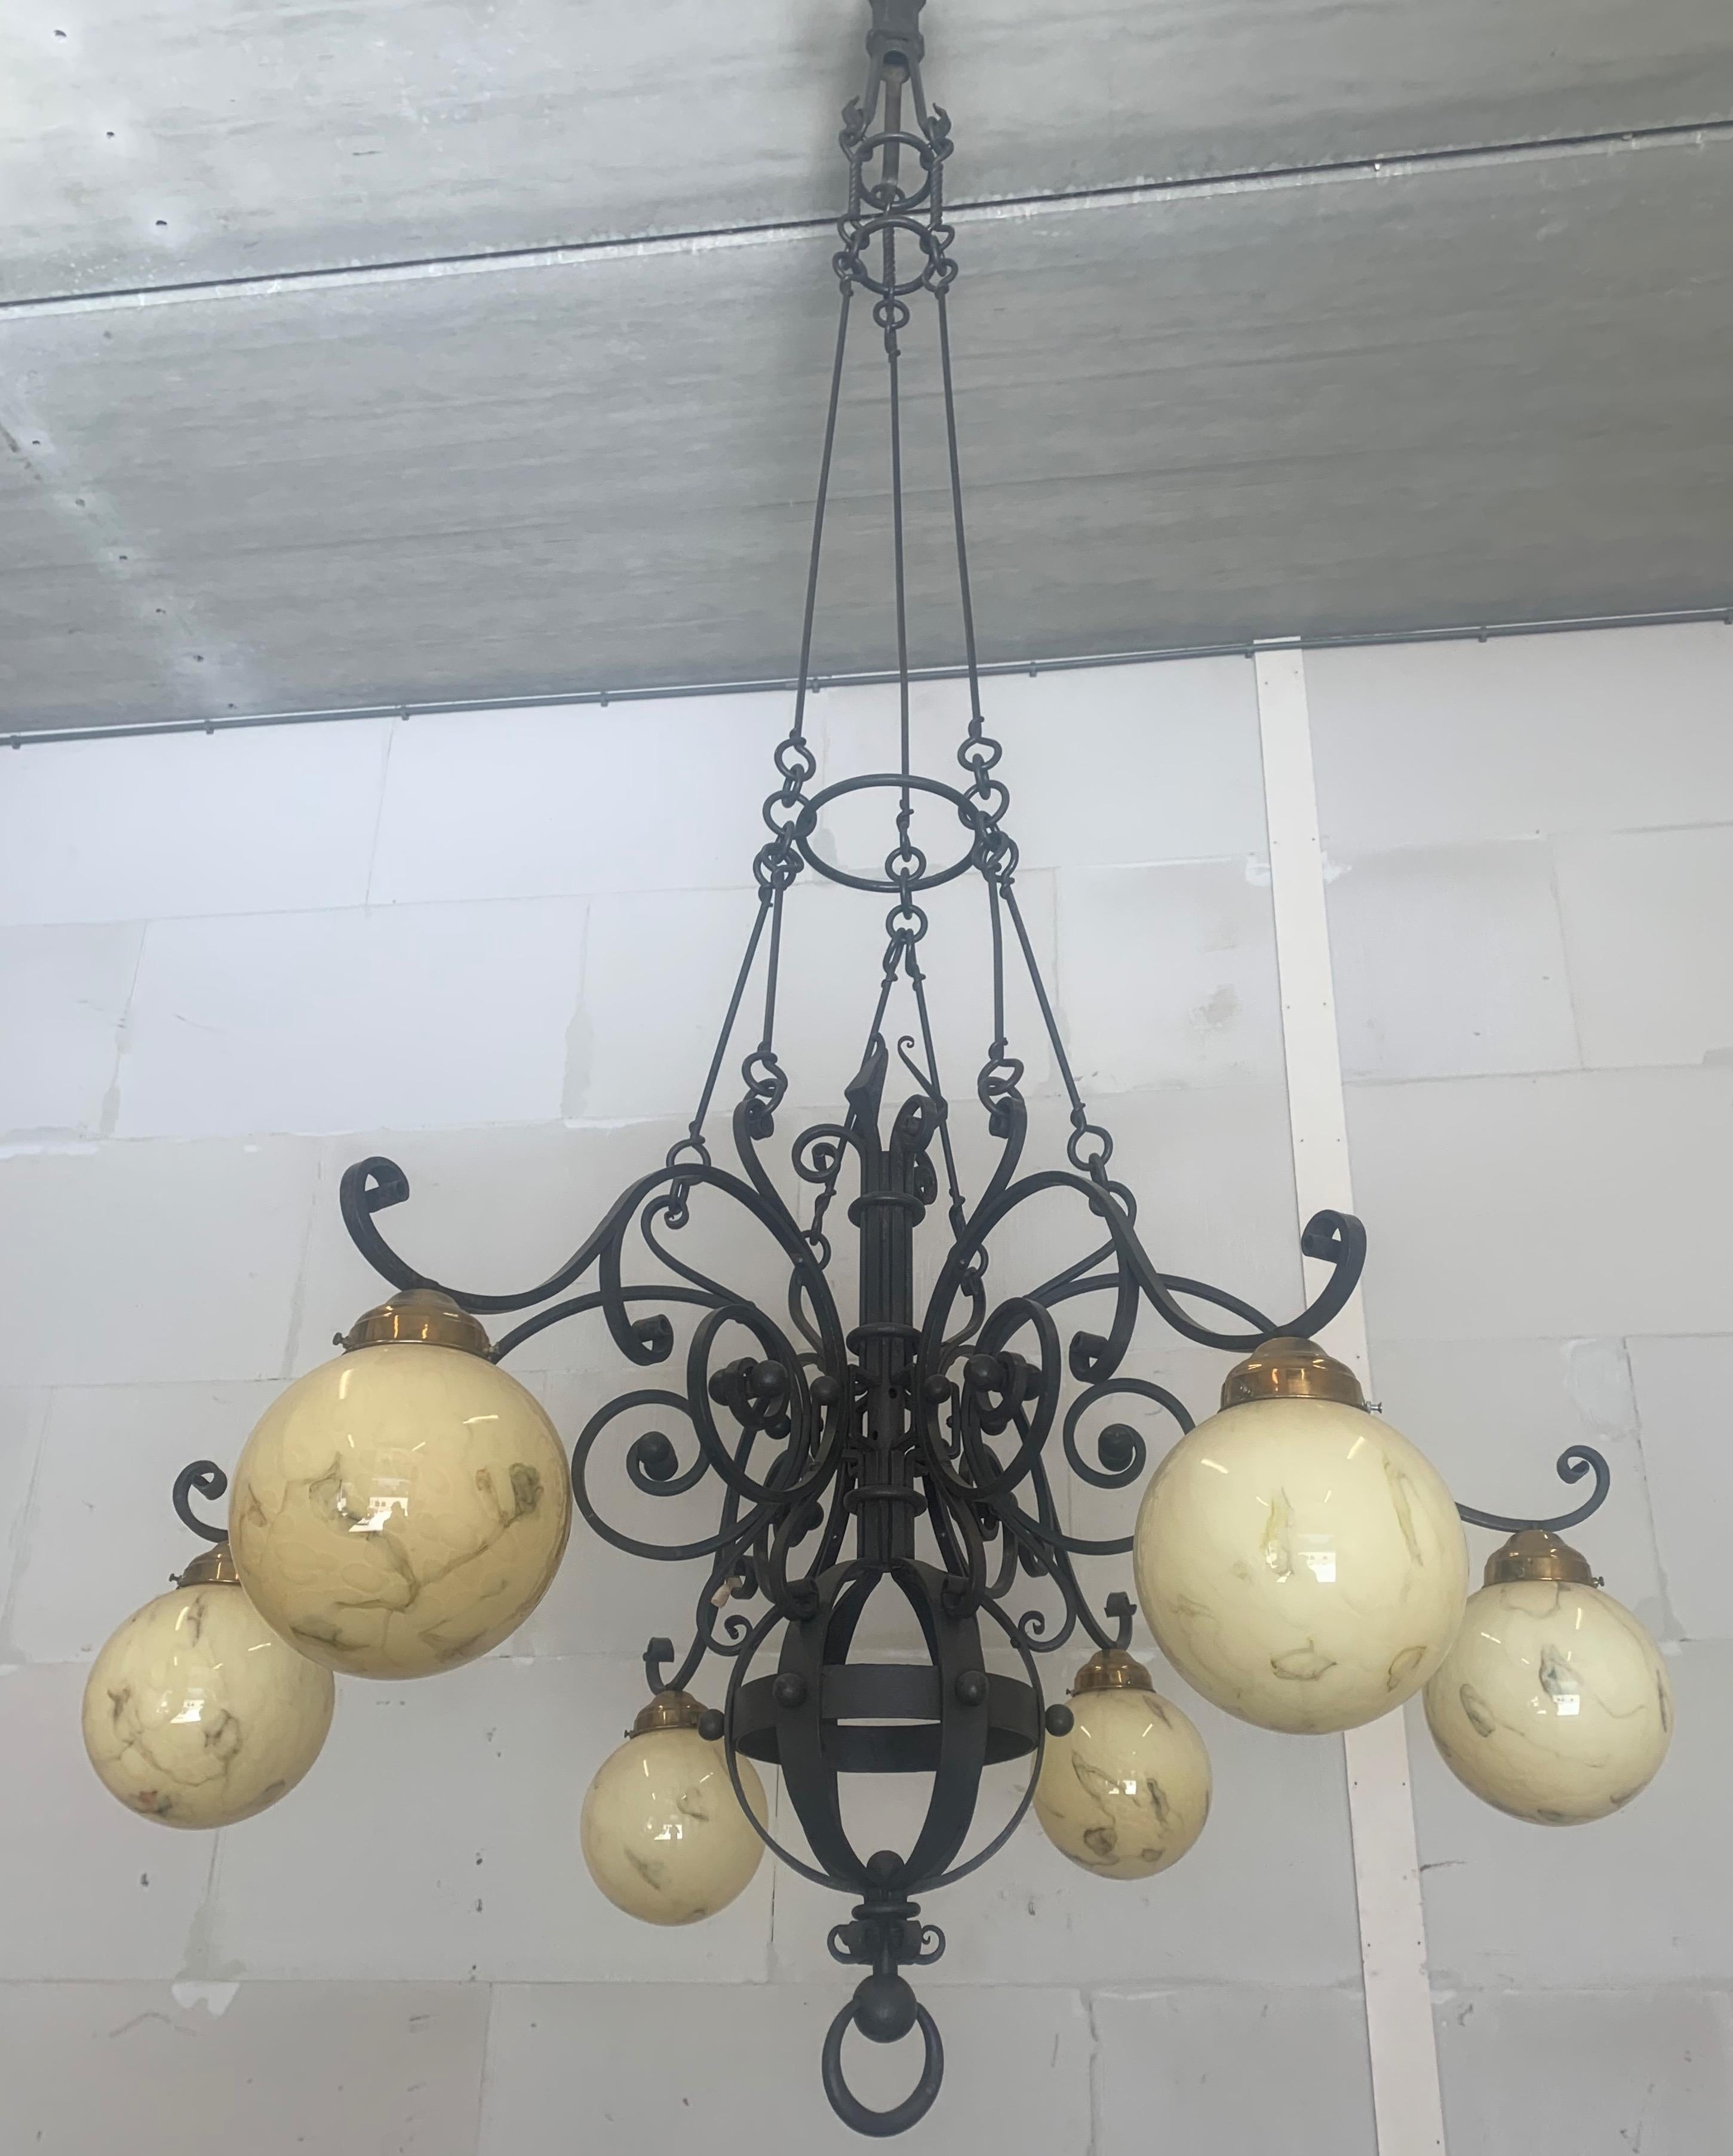  Huge 9 Feet High, Arts & Crafts Wrought Iron, Marbled Glass Chandelier Pendant  For Sale 8